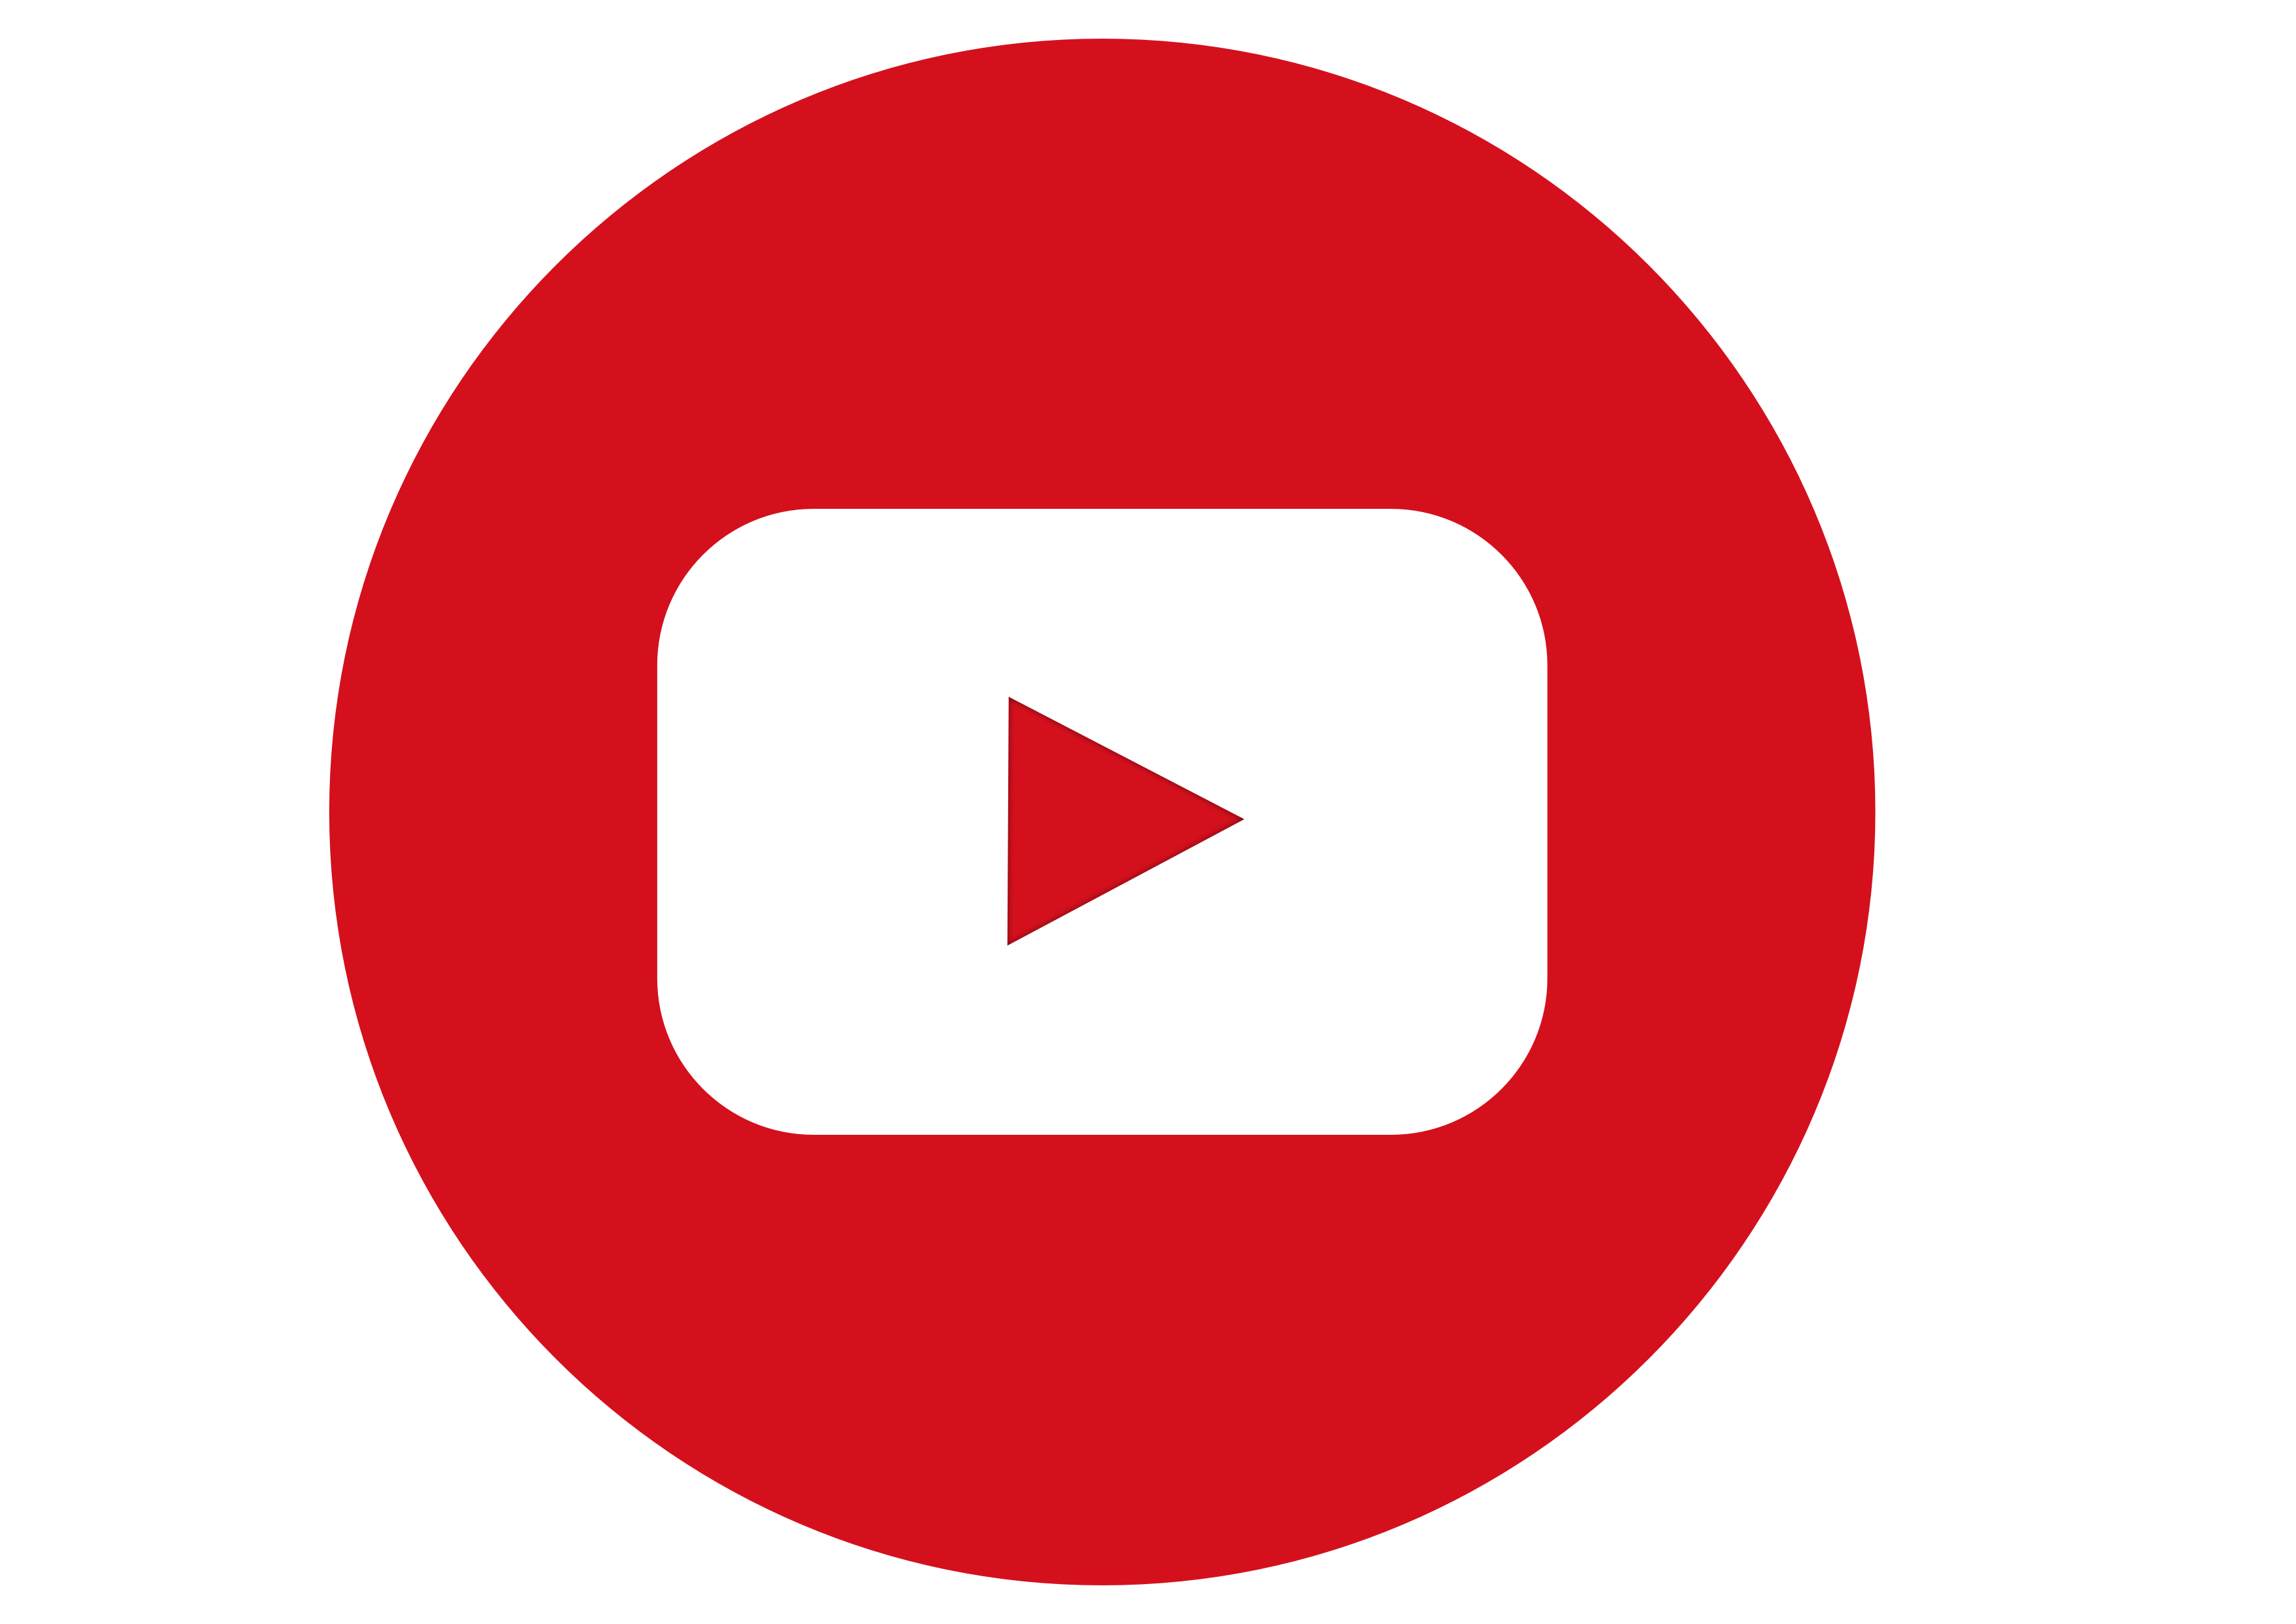 Subscribe to Wootu Nutrition's YouTube Channel for Inspiring Health Content, Tips, Delicious Recipes, and Engaging Videos.